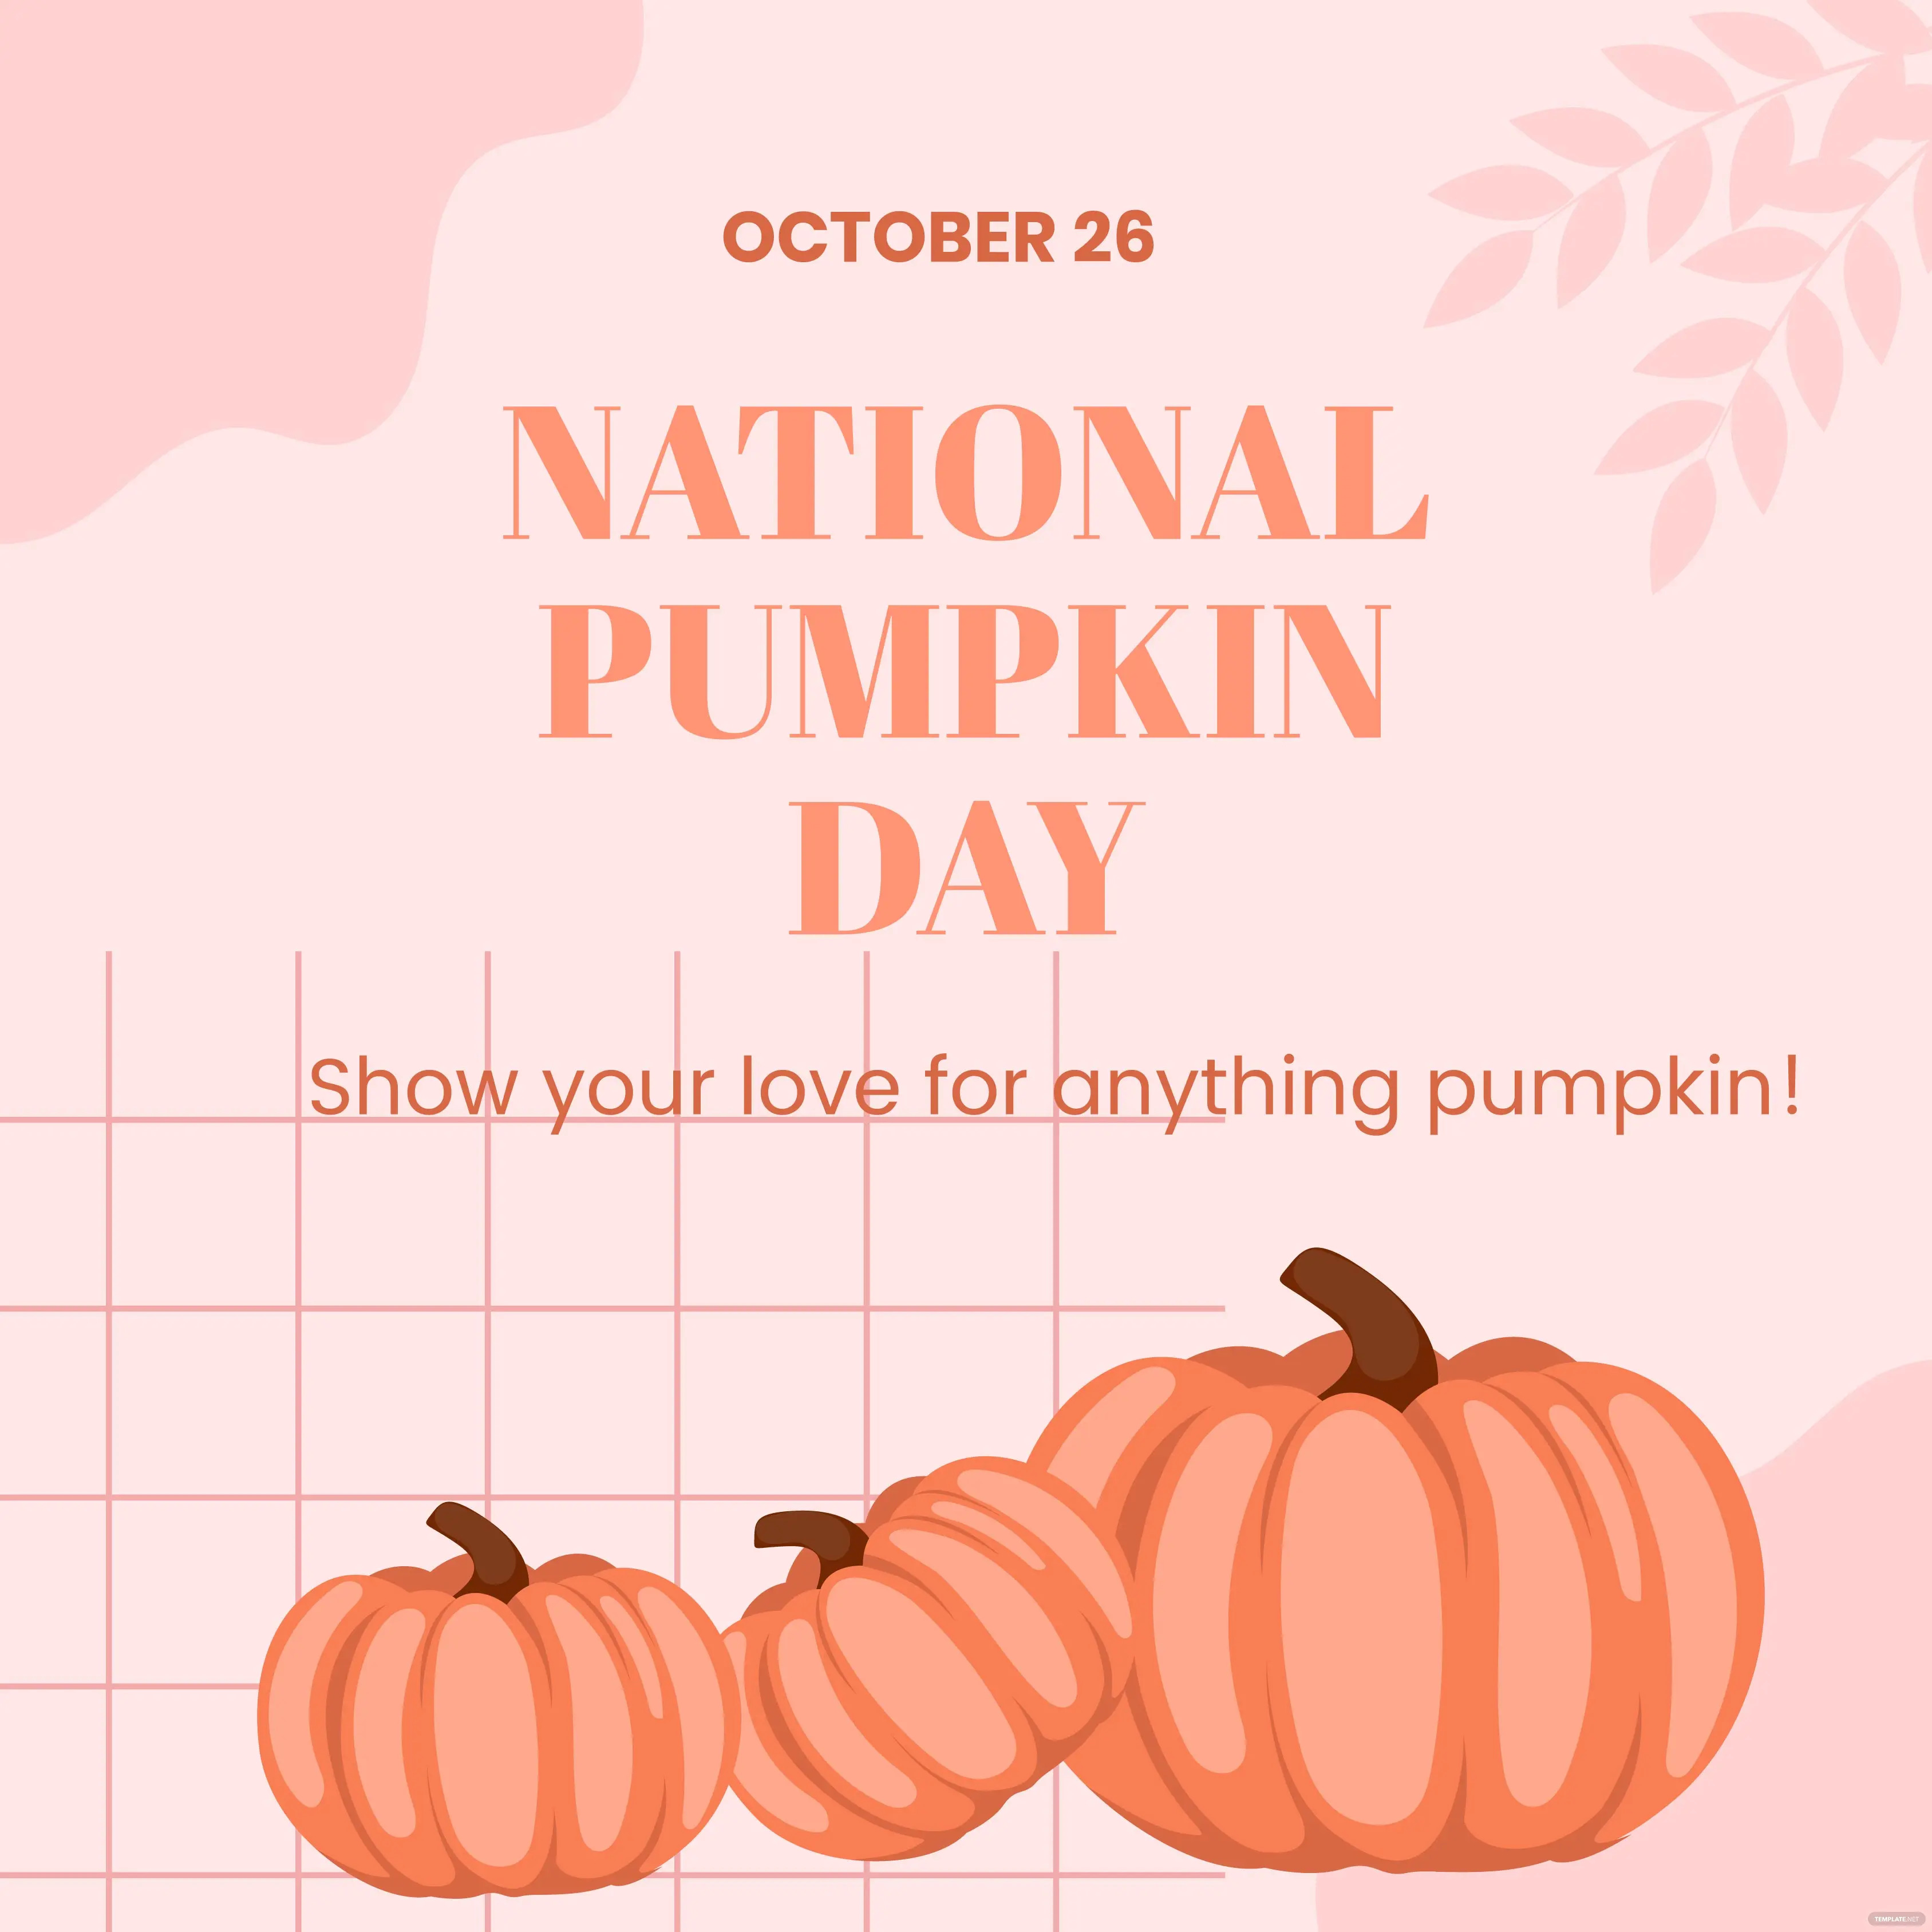 national pumpkin day instagram post ideas and examples